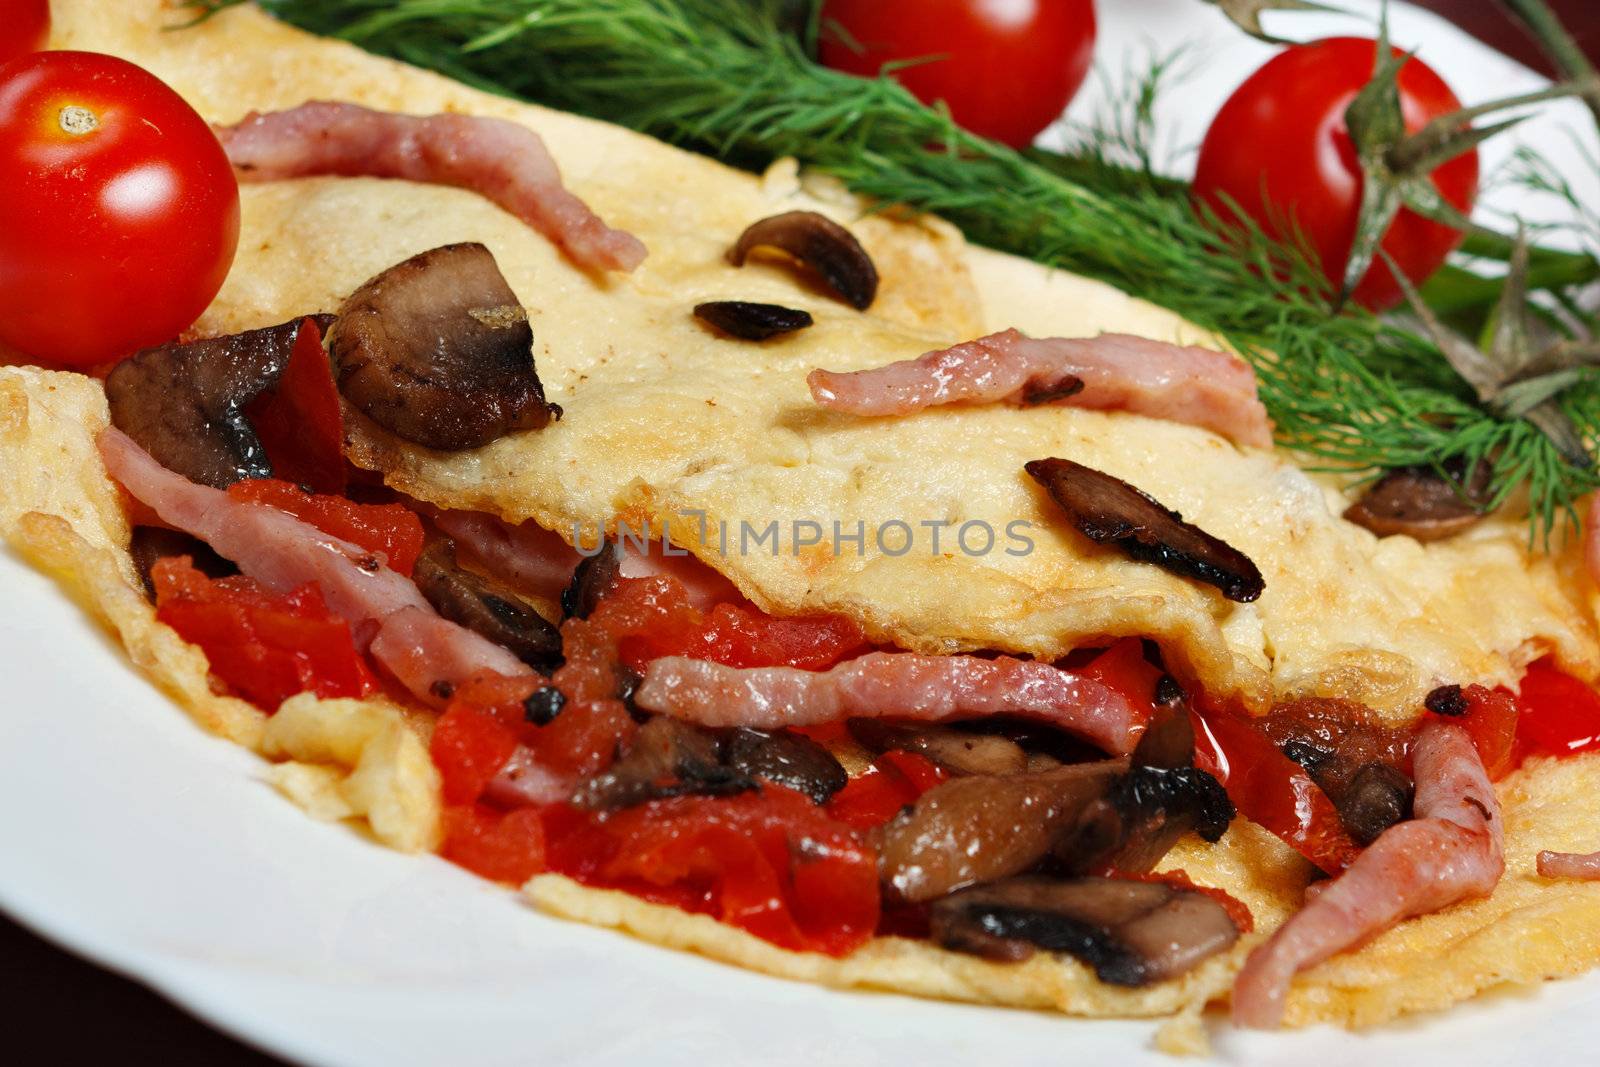 omelet with meat by nigerfoxy